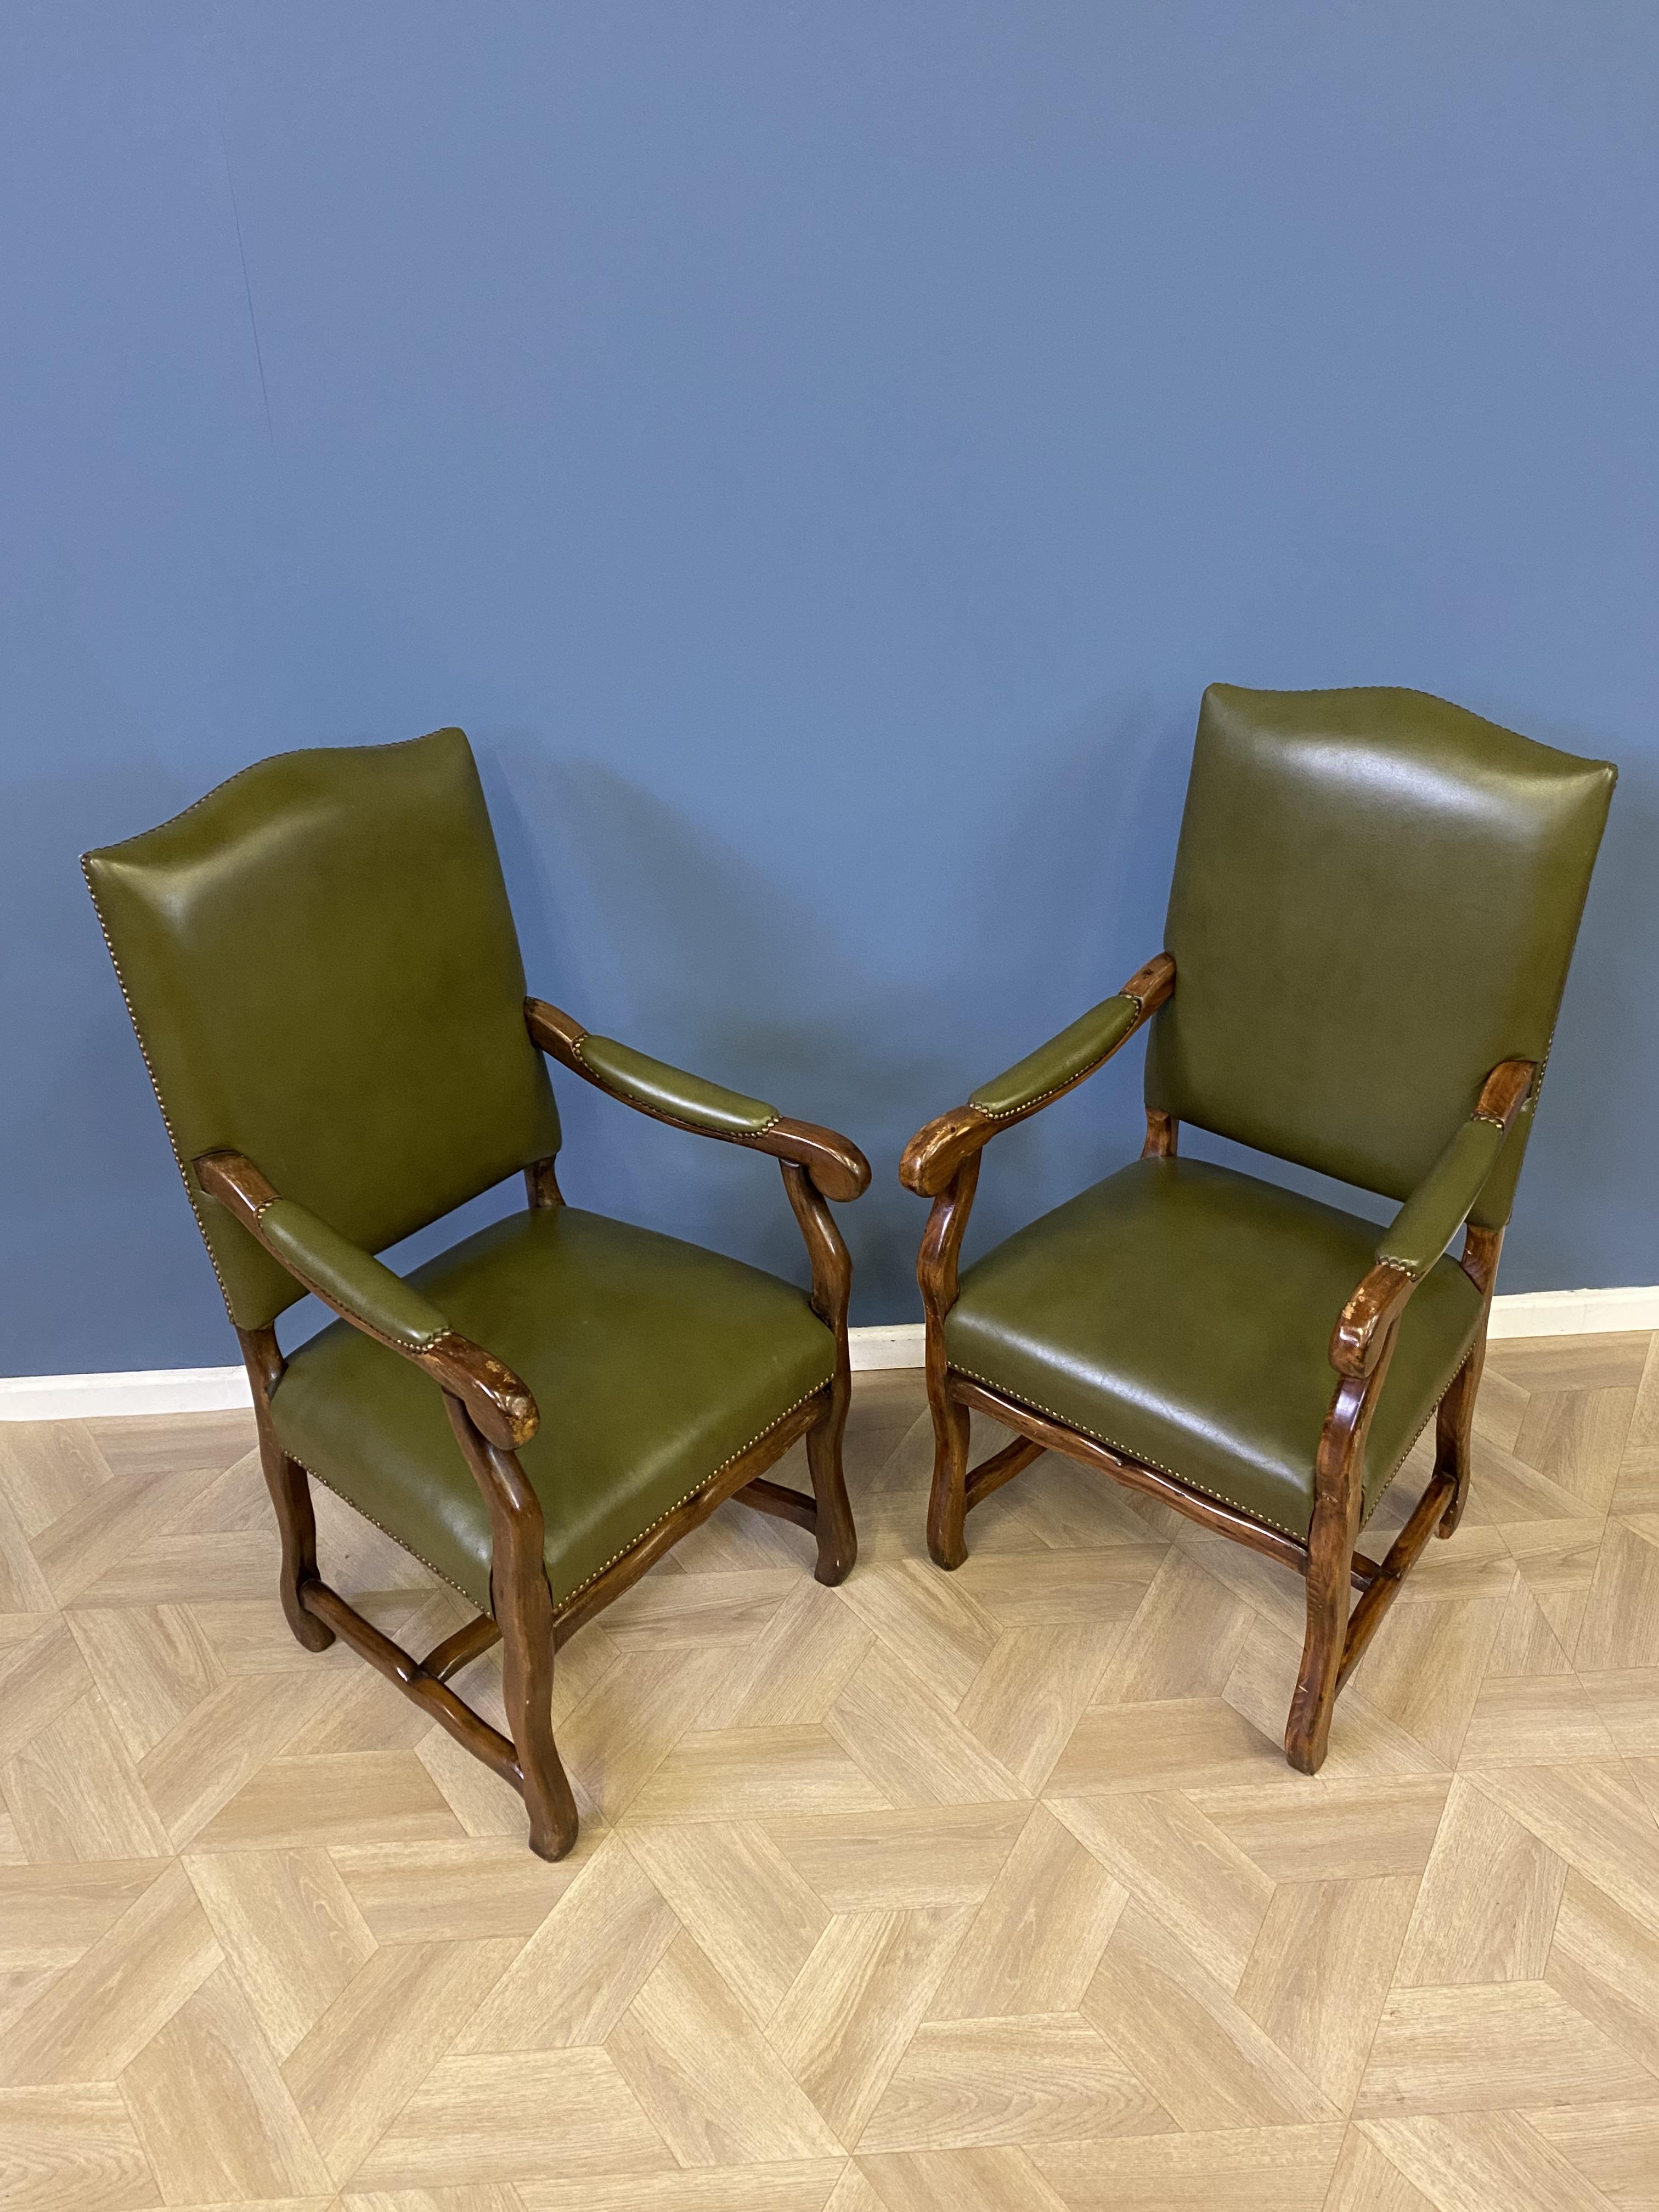 Pair of green leather open armchairs - Image 3 of 8